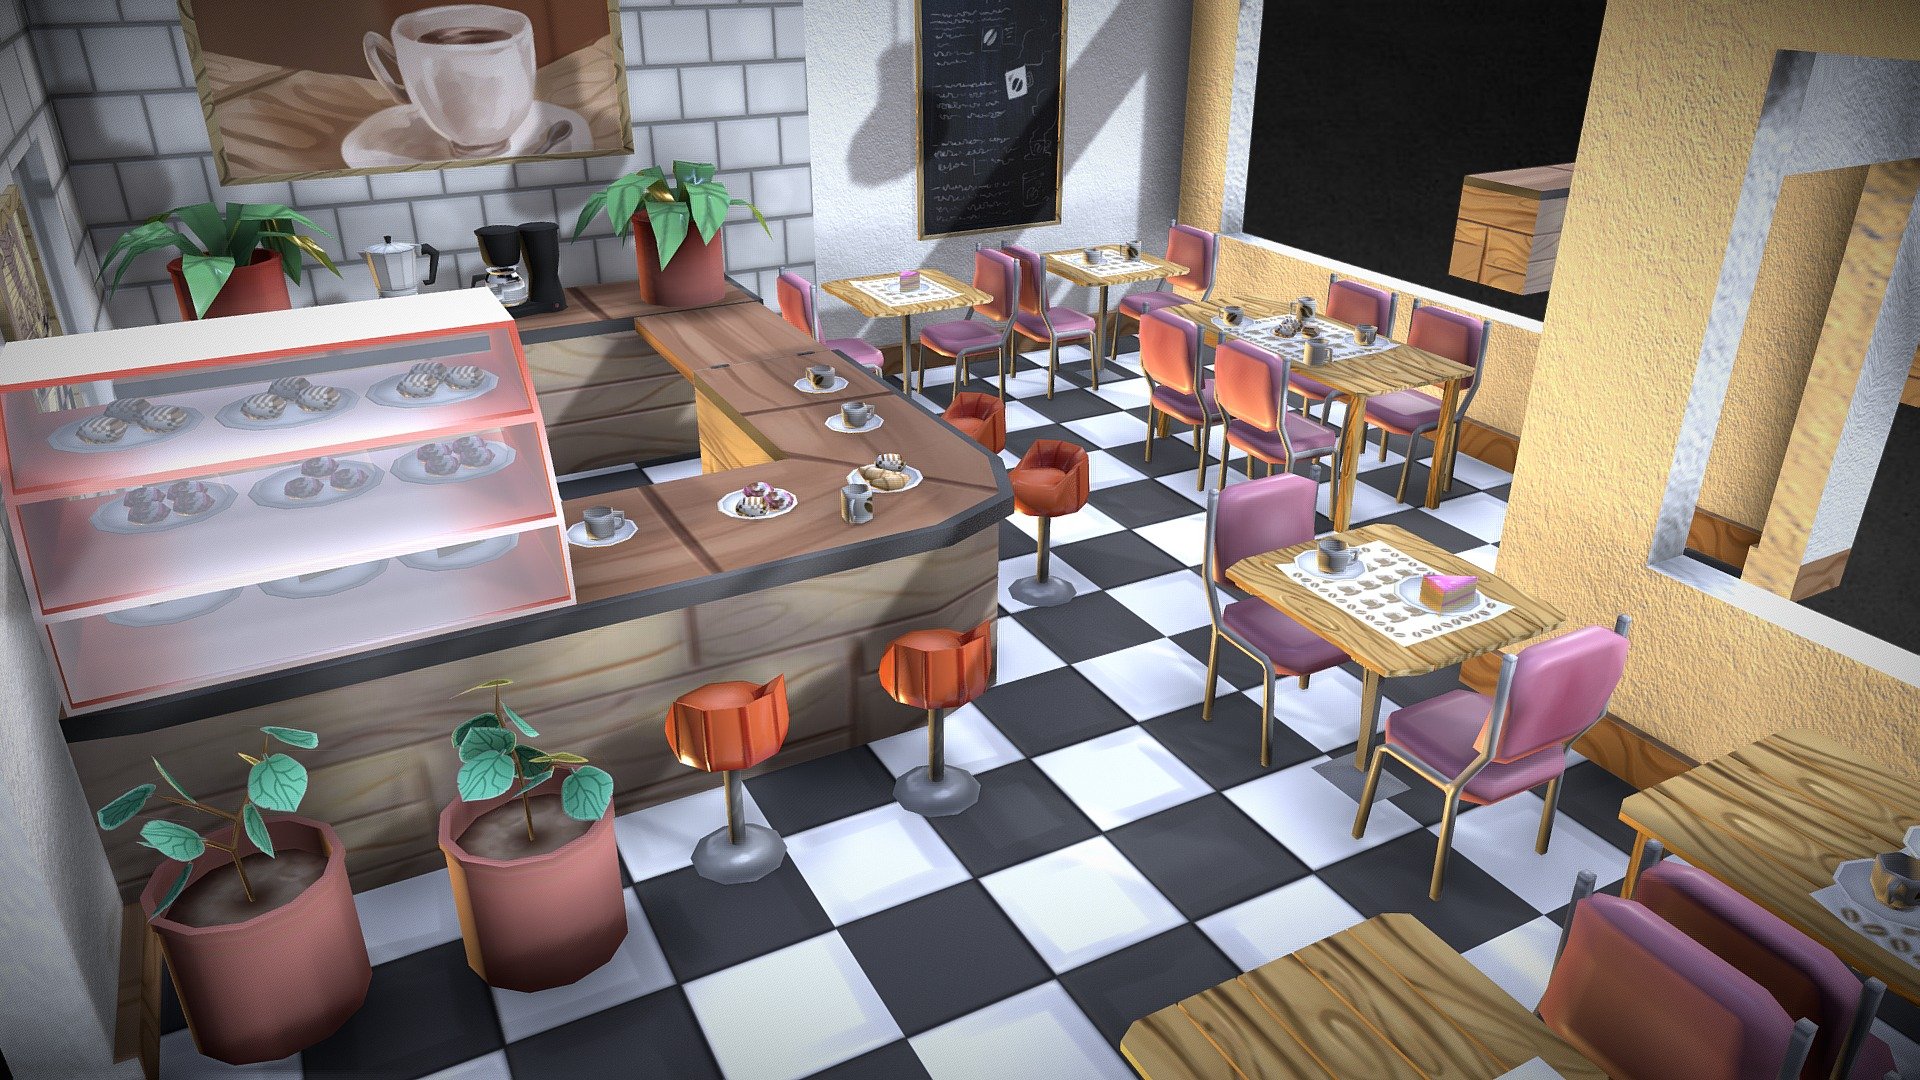 Lowpoly assets for your cartoon style video game

Models:
* A bar
* a cake rack
* an italian coffee pot
* coffee maker
* food (donuts, croissant)
* two types of plants
* two types of frames
* a blackboard
* a spotlight
* two types of walls
* a tile floor
* two types of table
* two types of chairs
* two types of cups and plates
* a spoon
* a jug of coffee - Coffee shop assets lowpoly - Buy Royalty Free 3D model by Hobu (@Hobu_Coffee) 3d model